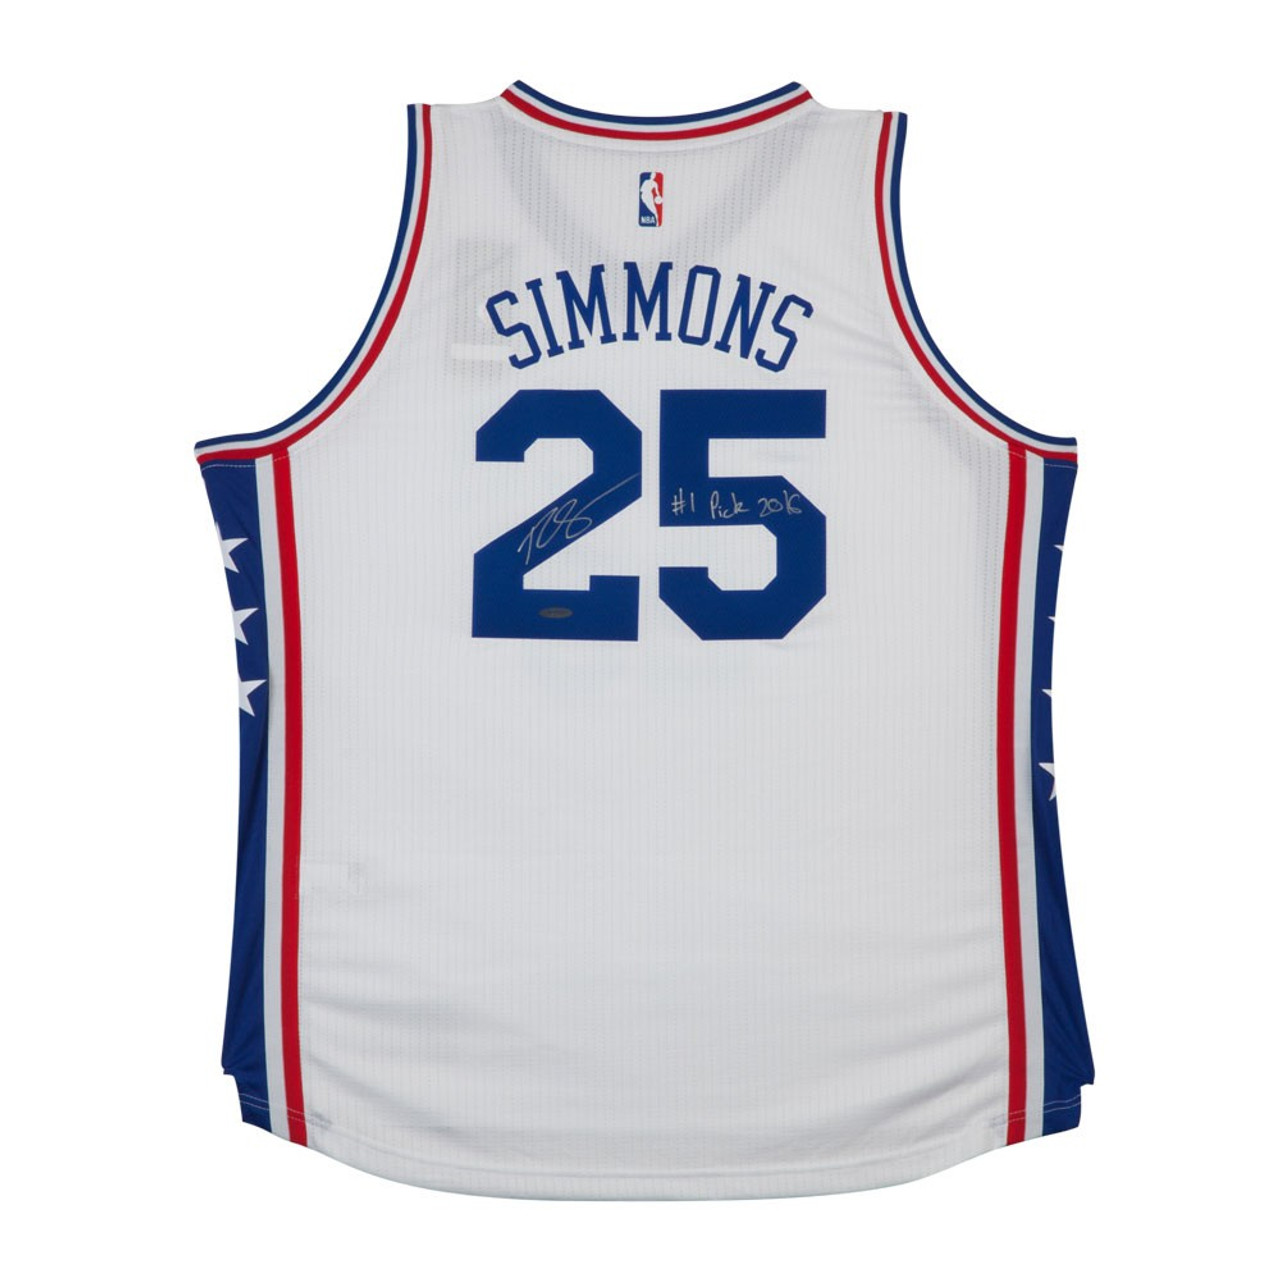 BEN SIMMONS Autographed & Inscribed 76ers Home Jersey UDA - Game